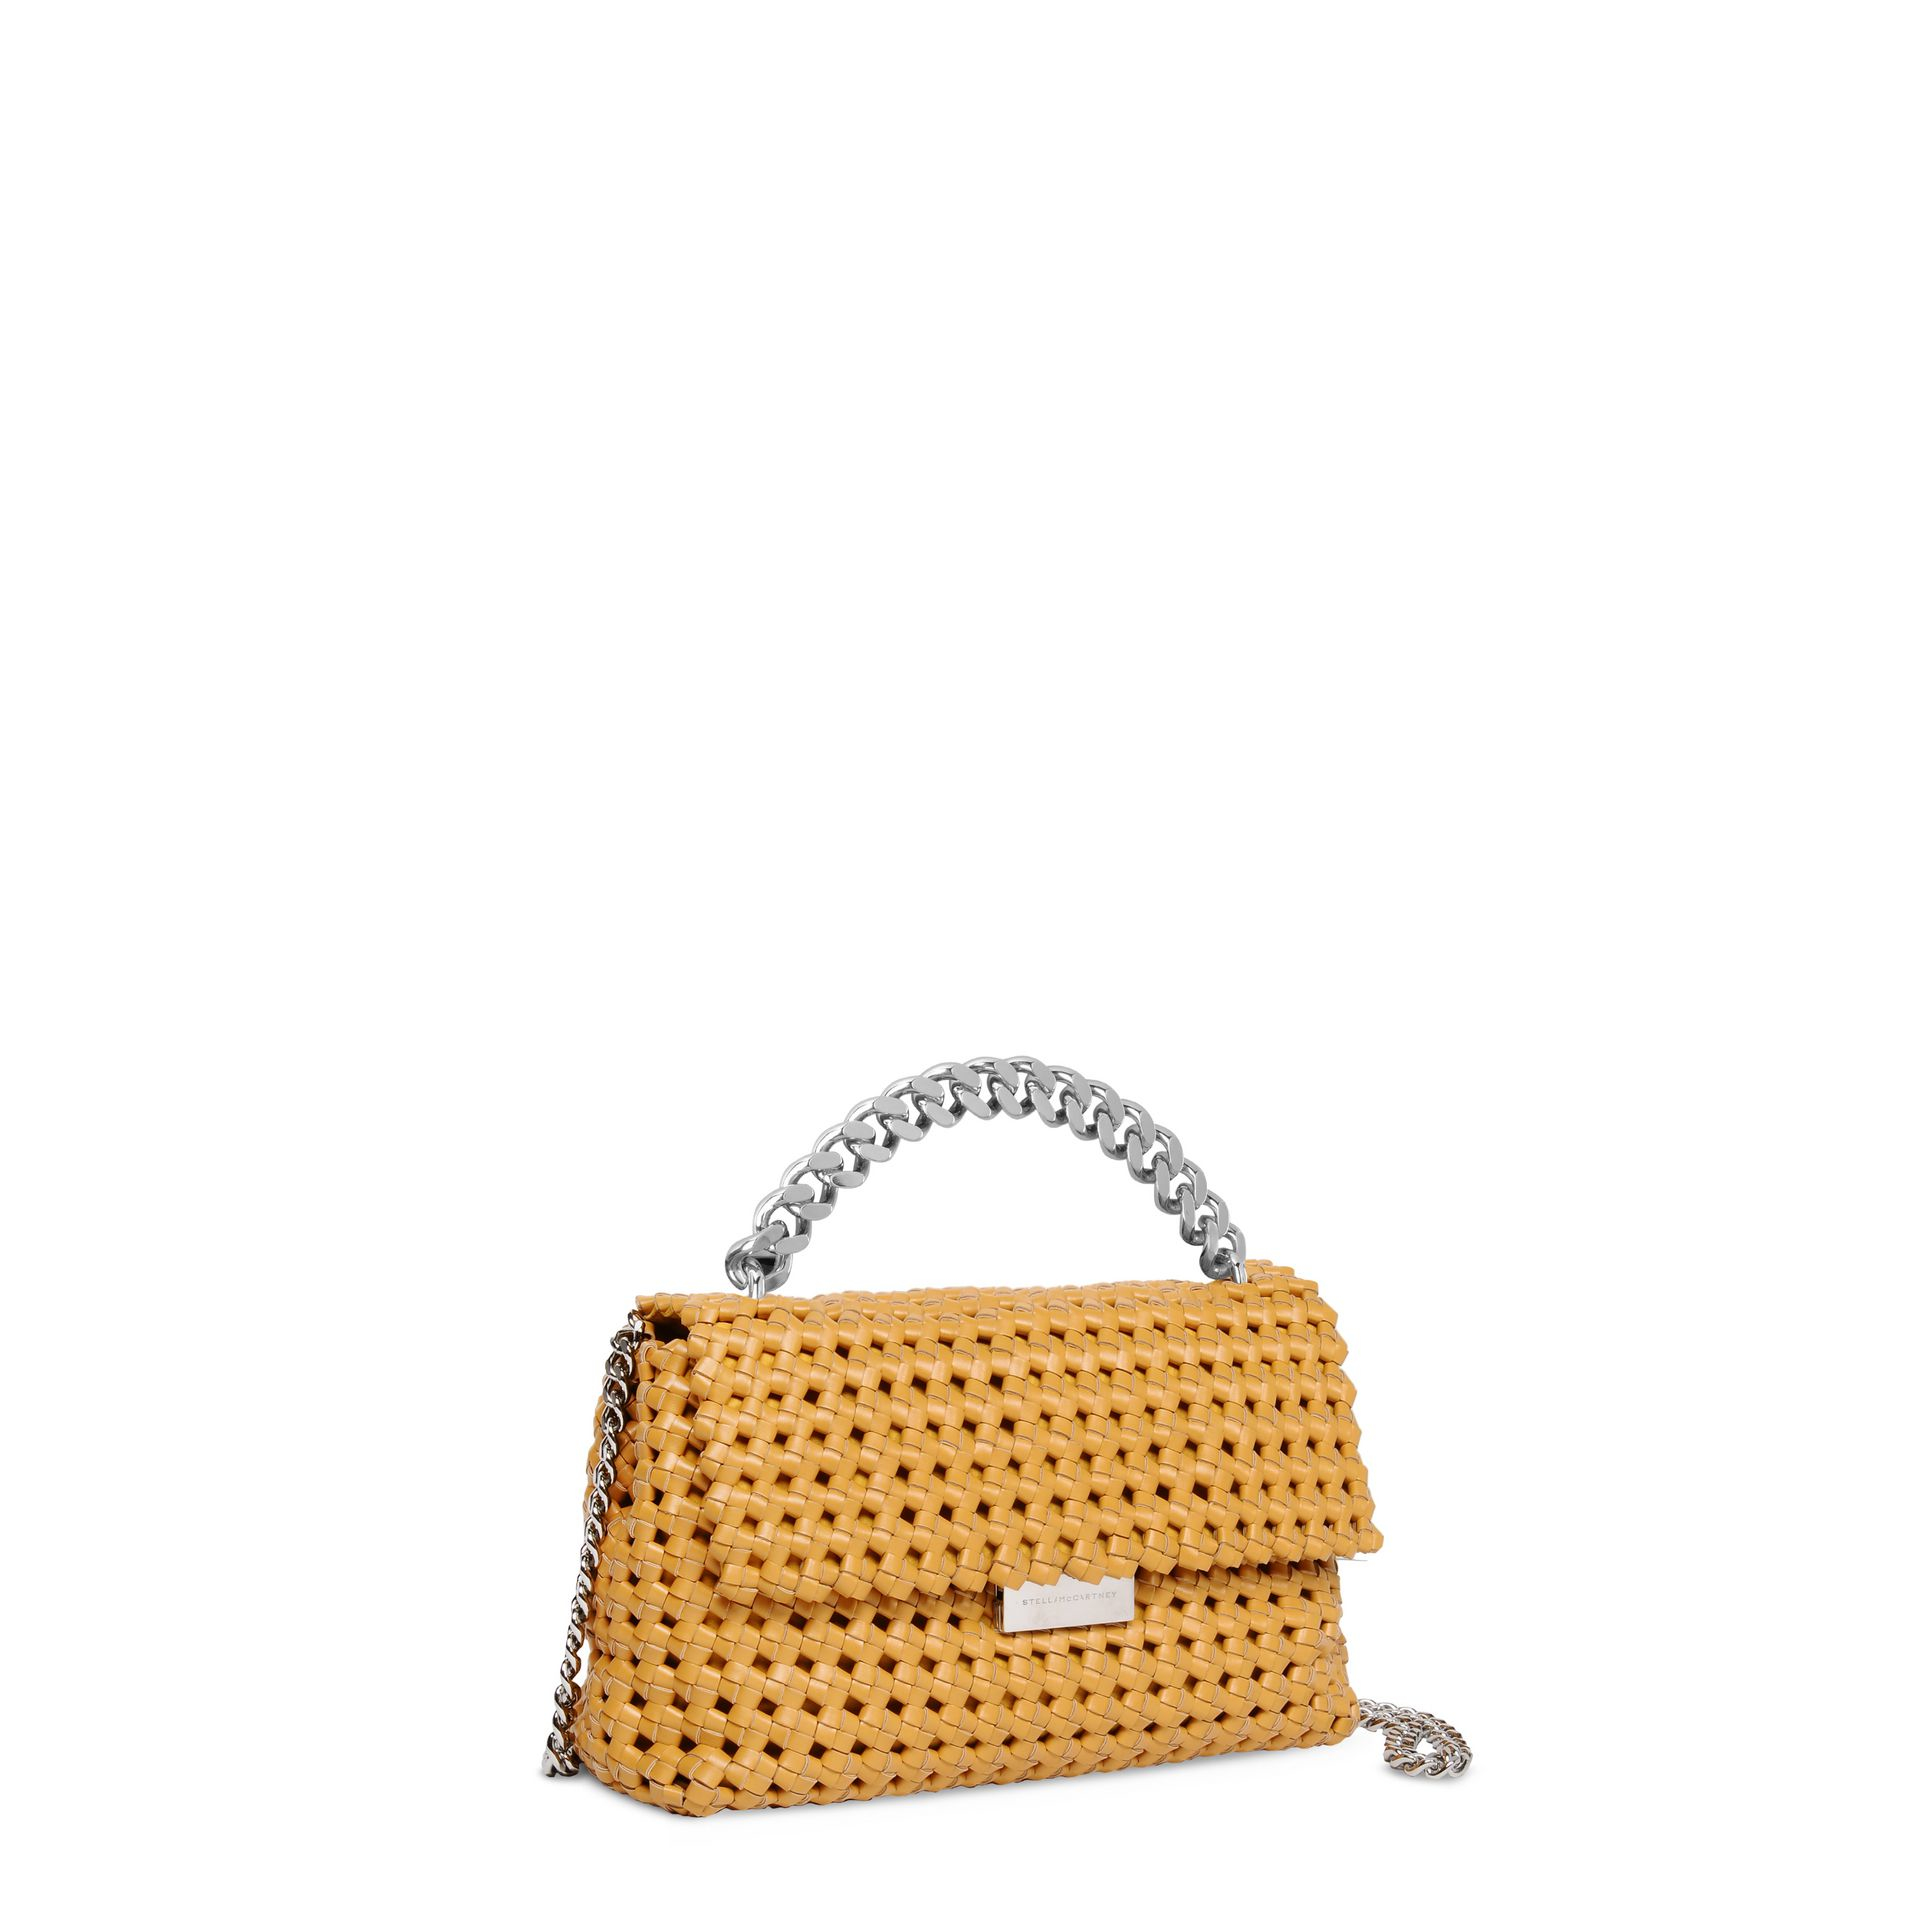 Lyst - Stella Mccartney Becks Small Woven Faux-Leather Shoulder Bag in Yellow